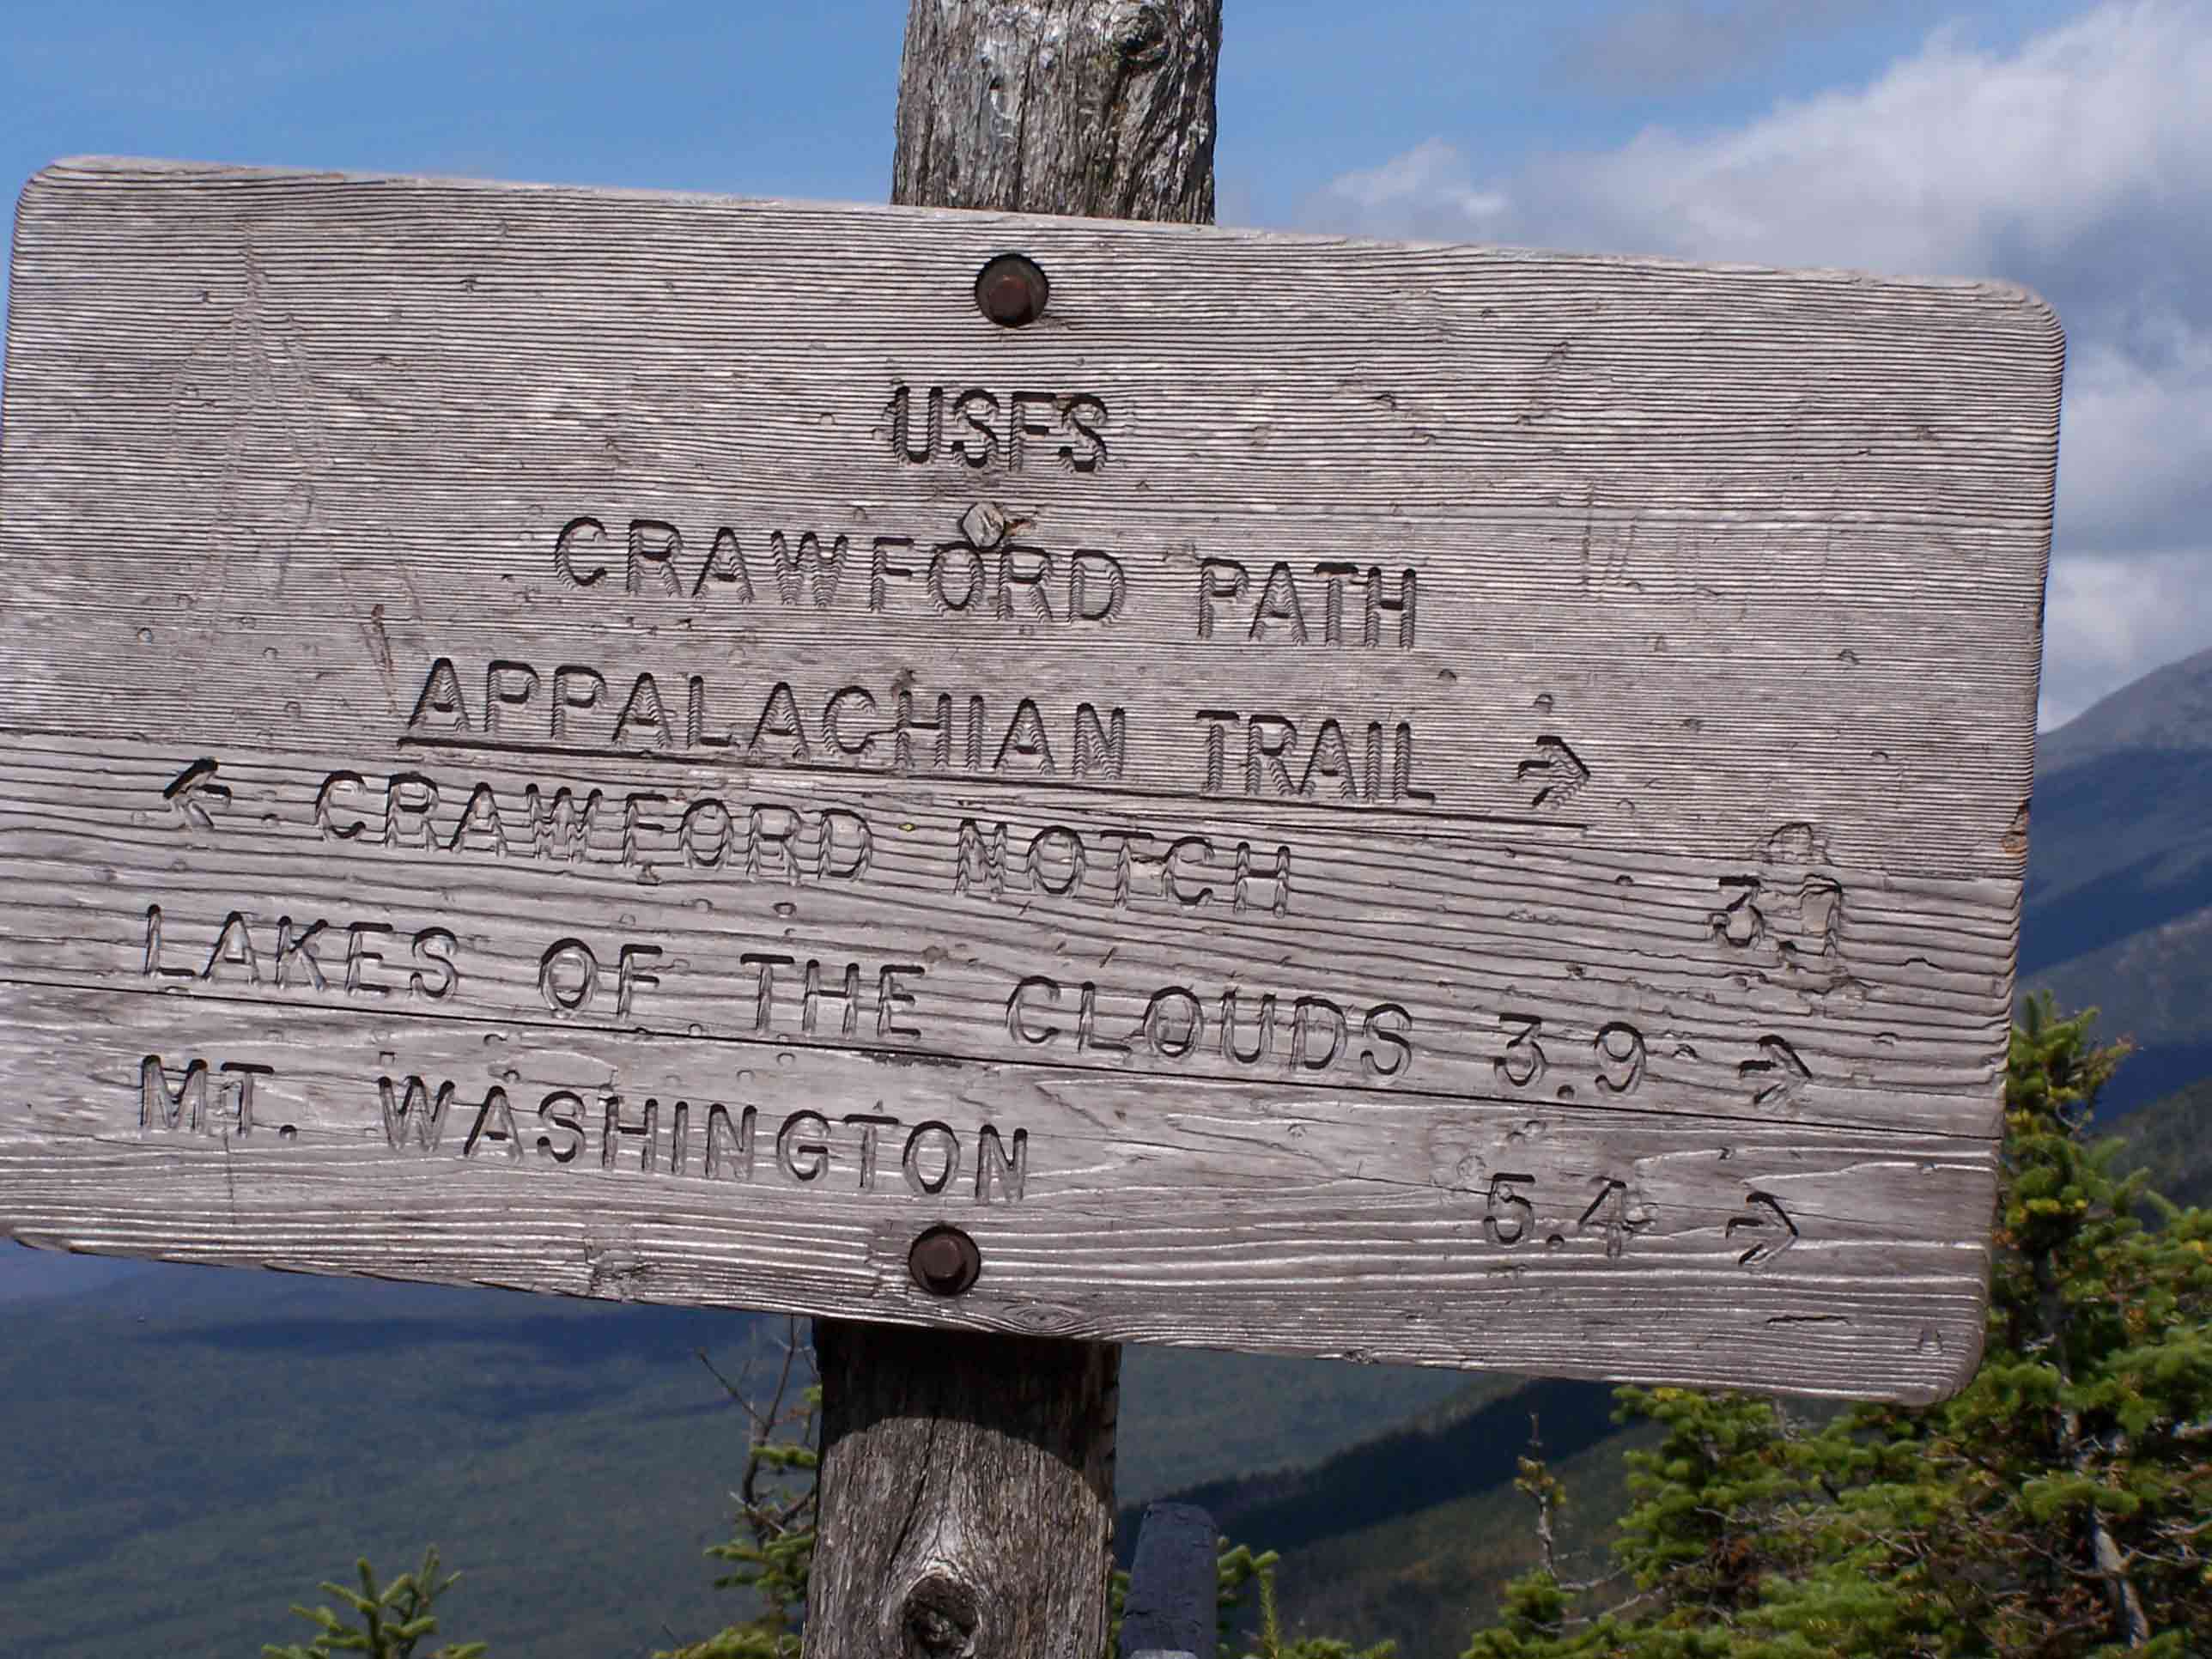 mm 18.7 - Sign where Crawford Path intersects AT GPS N44.22698 W71.36572 el. 4,259  Courtesy at@rohland.org